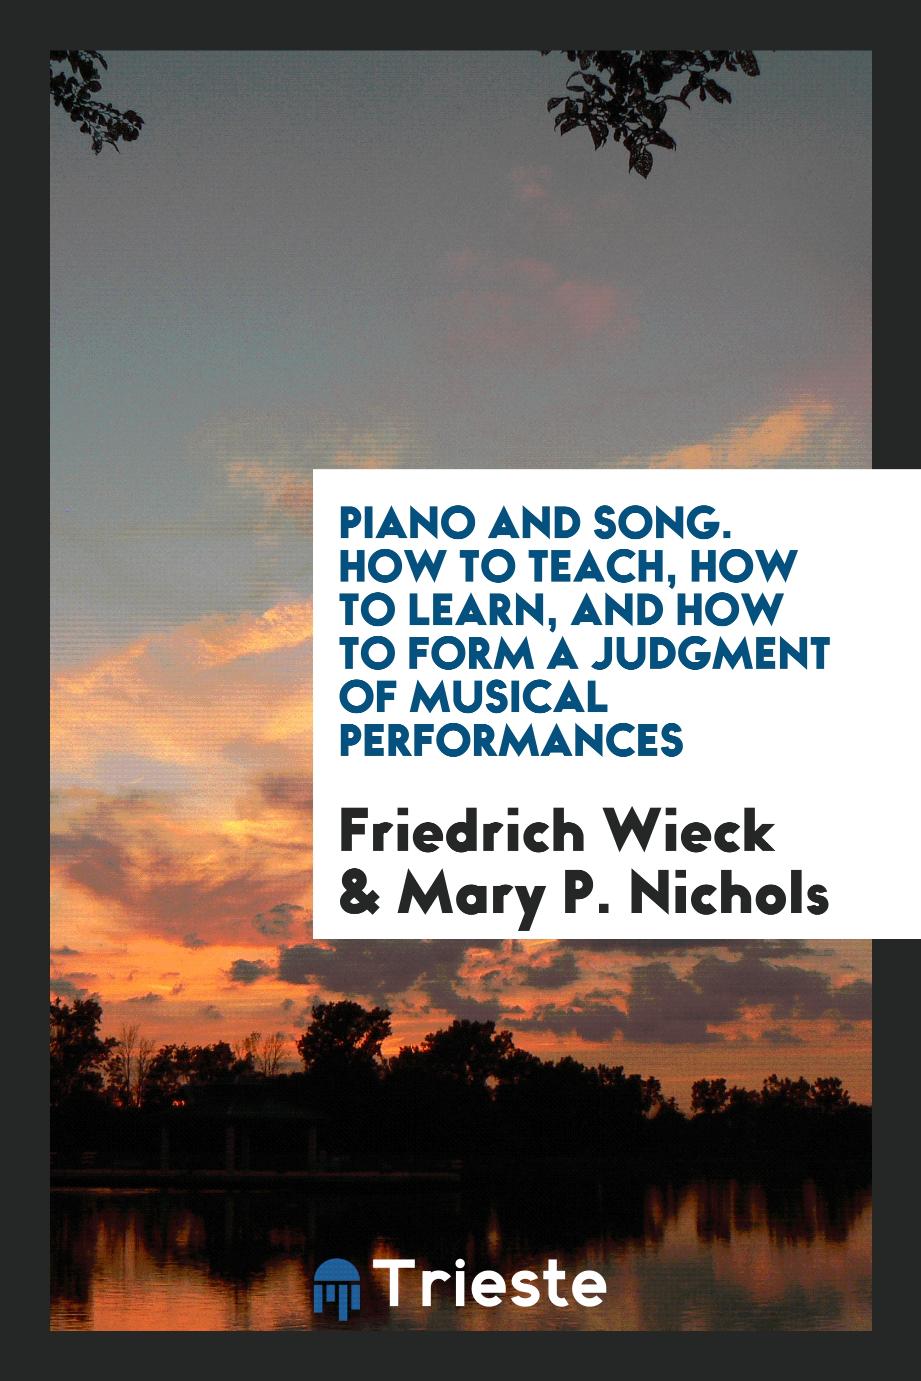 Piano and song. How to teach, how to learn, and how to form a judgment of musical performances